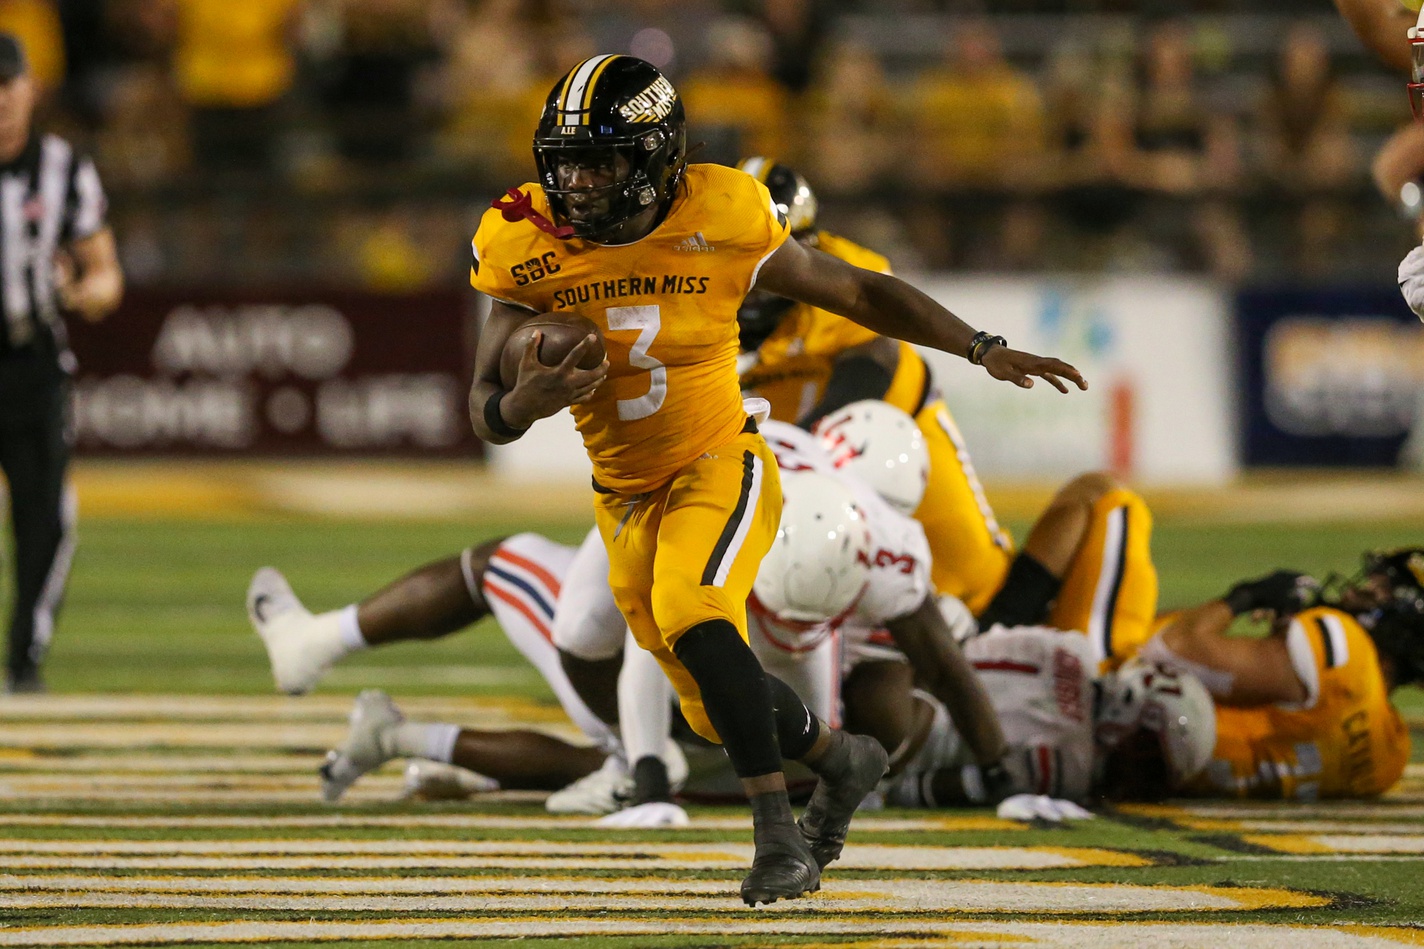 Southern Miss Golden Eagles Preview Roster, Prospects, Schedule, and More